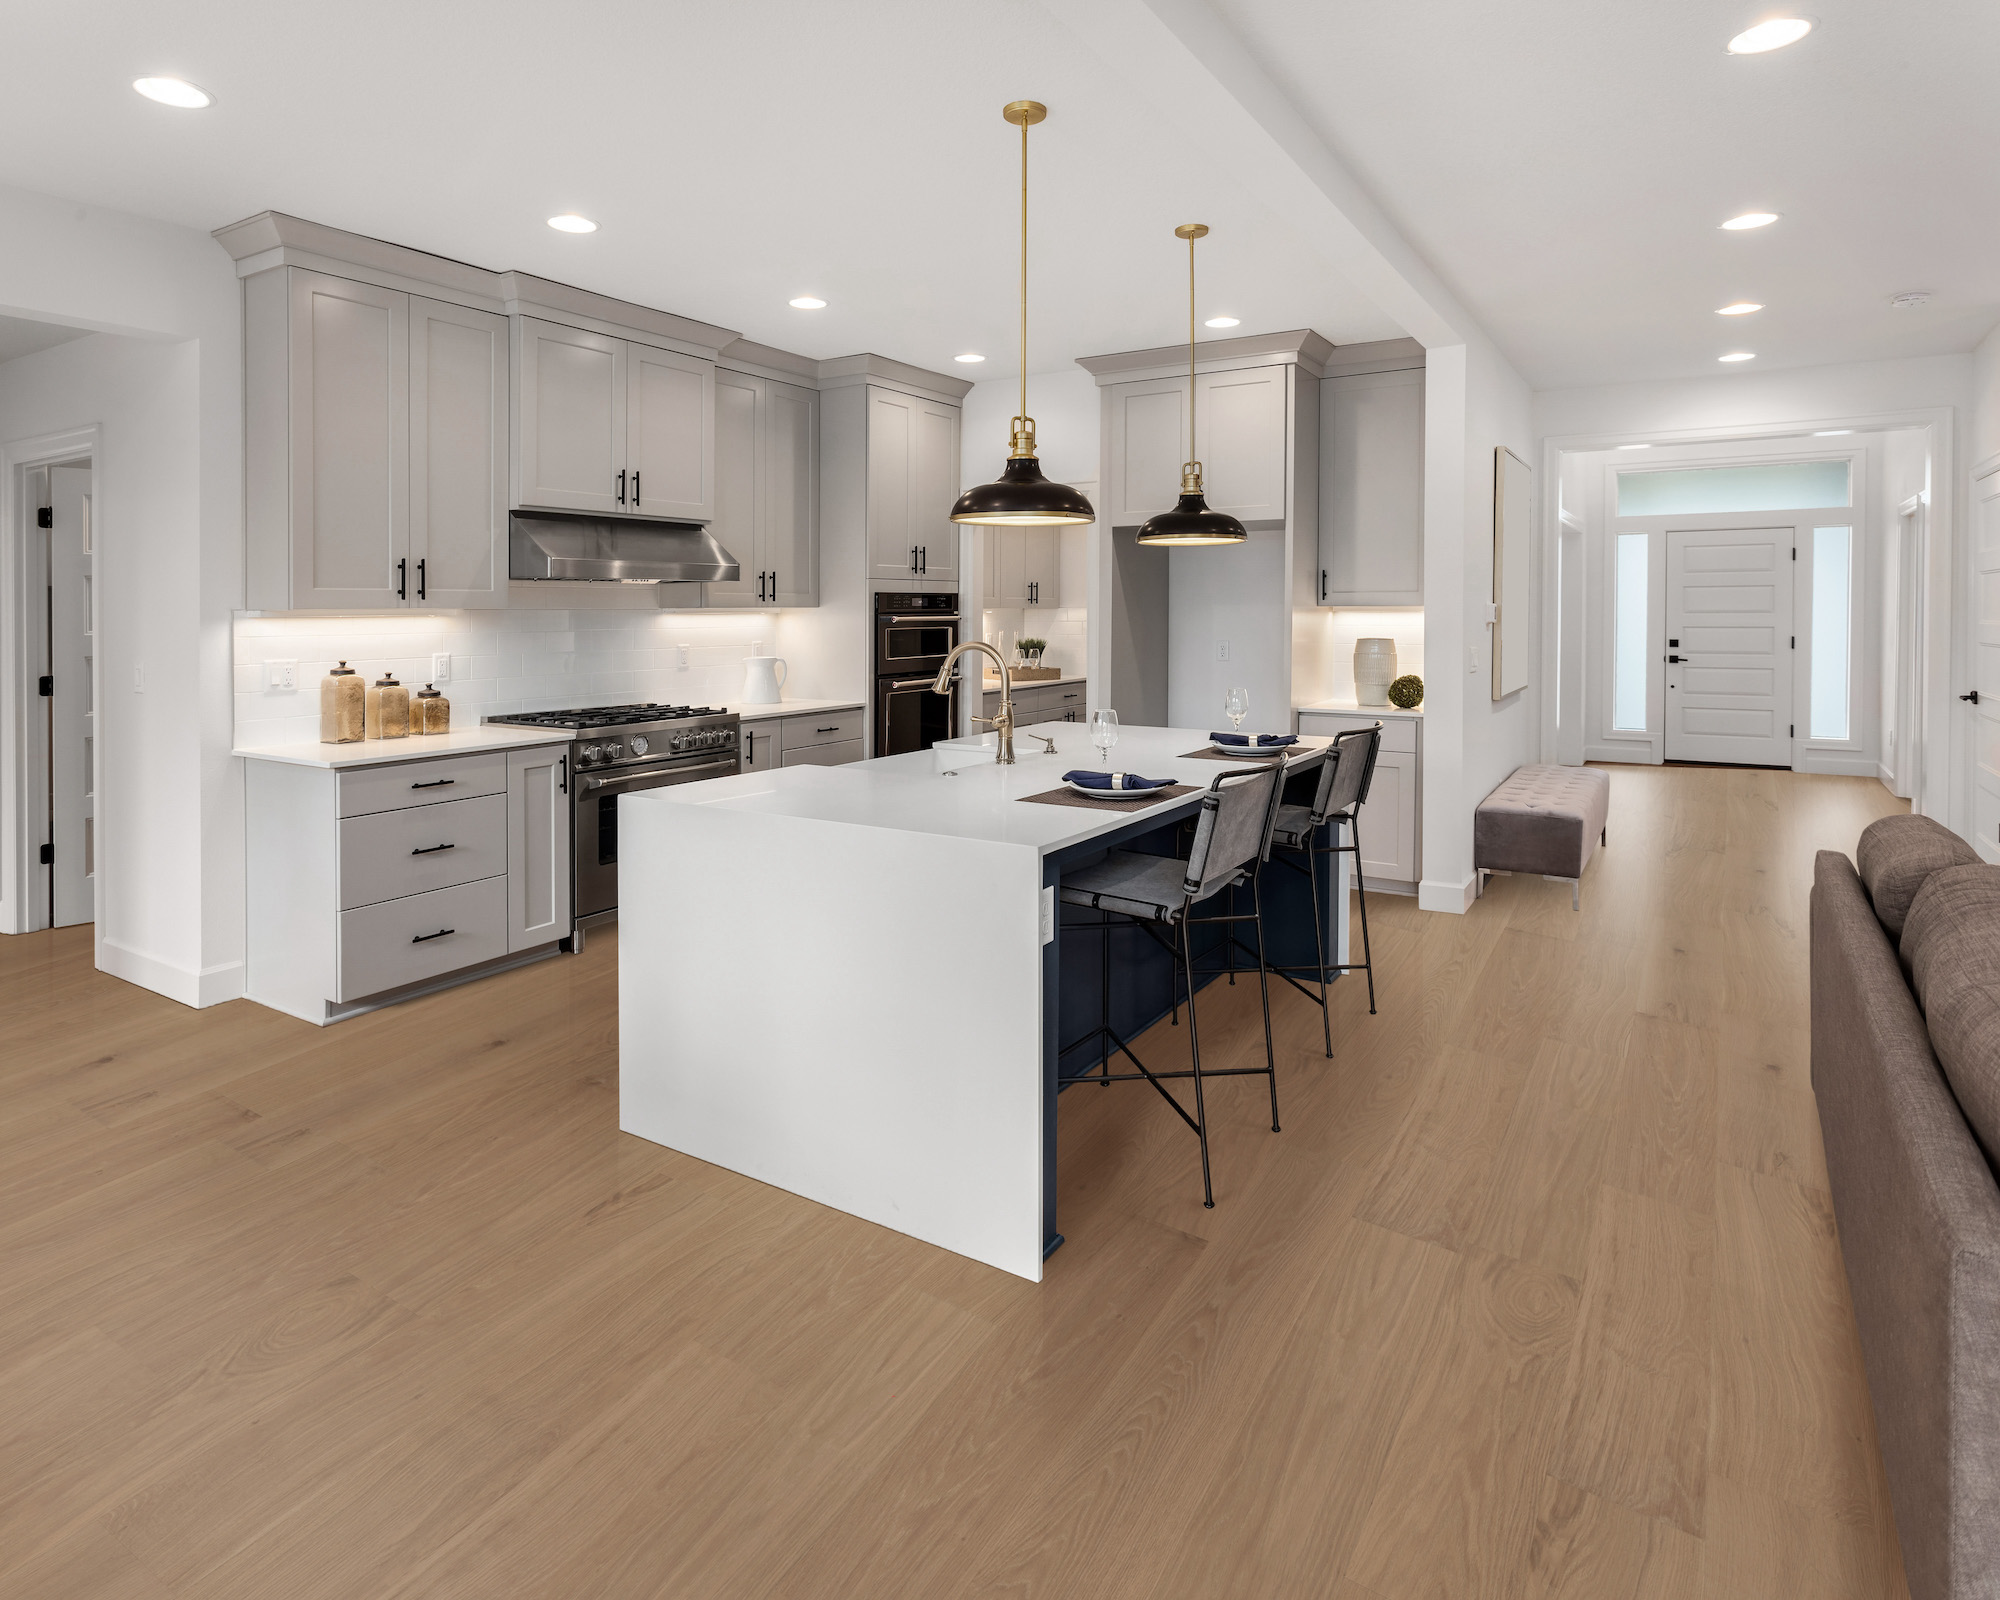 kitchen in new luxury home with waterfall island, stainless steel appliances, pendant lights, and CALI hardwood floors